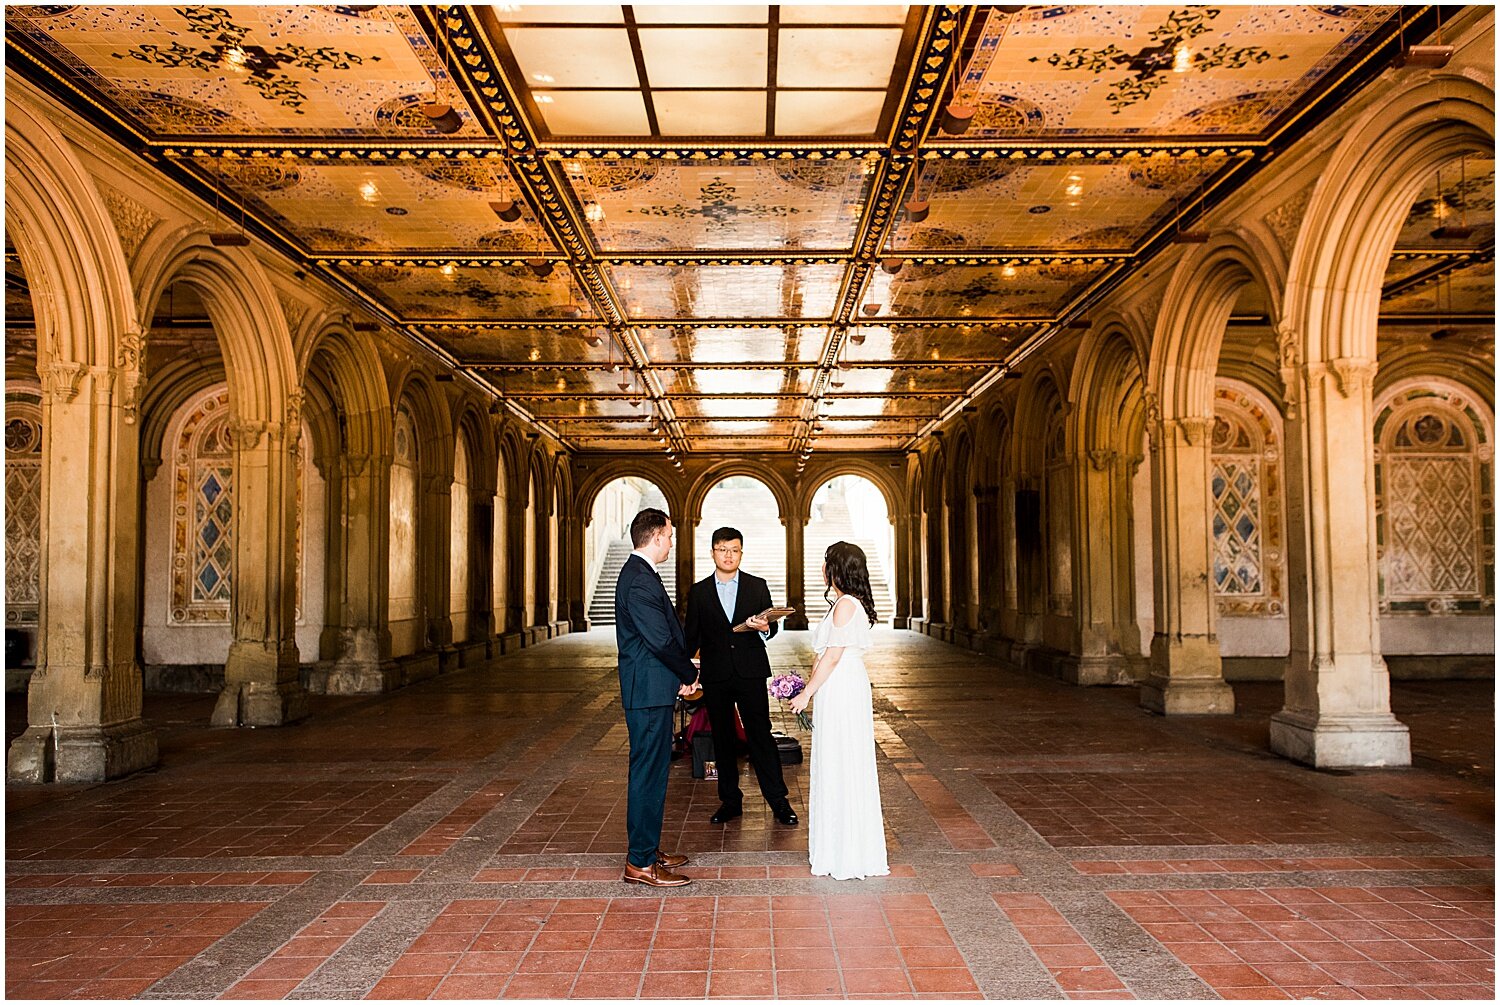 Apollo Fields  Long Island Wedding Photography Blog — Bethesda Fountain  Elopement in NYC's Central Park